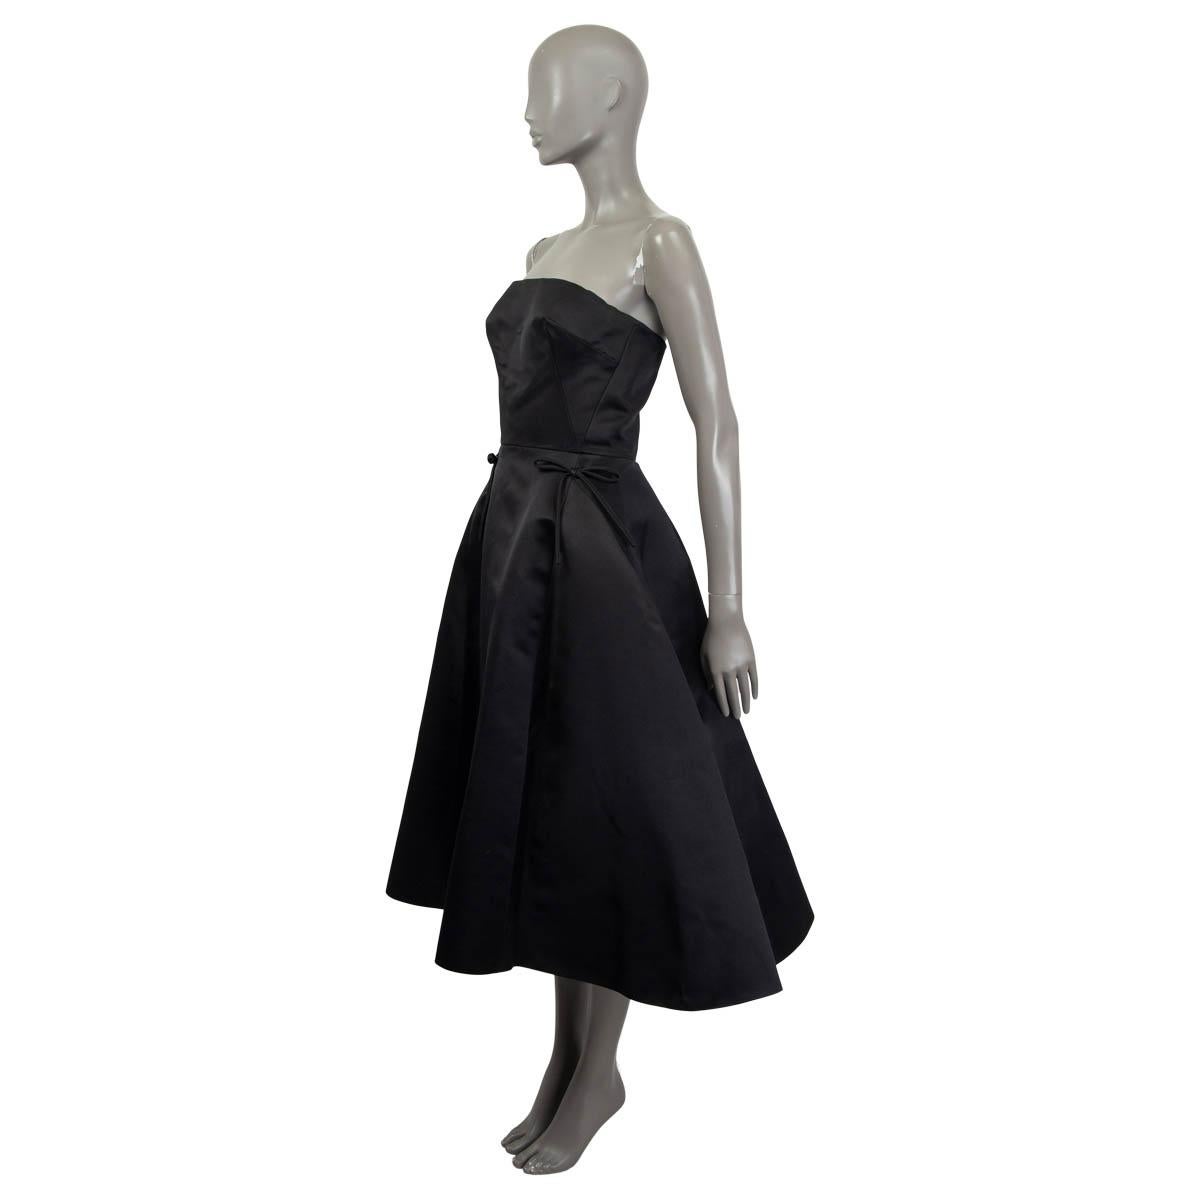 100% authentic Christian Dior 2016 flared corsage satin dress in black silk (100%). Features two meshes on the front and a tulle slip skirt. Corsage and dress both open with a concealed zipper and a hook at the back. Skirt opens with concealed